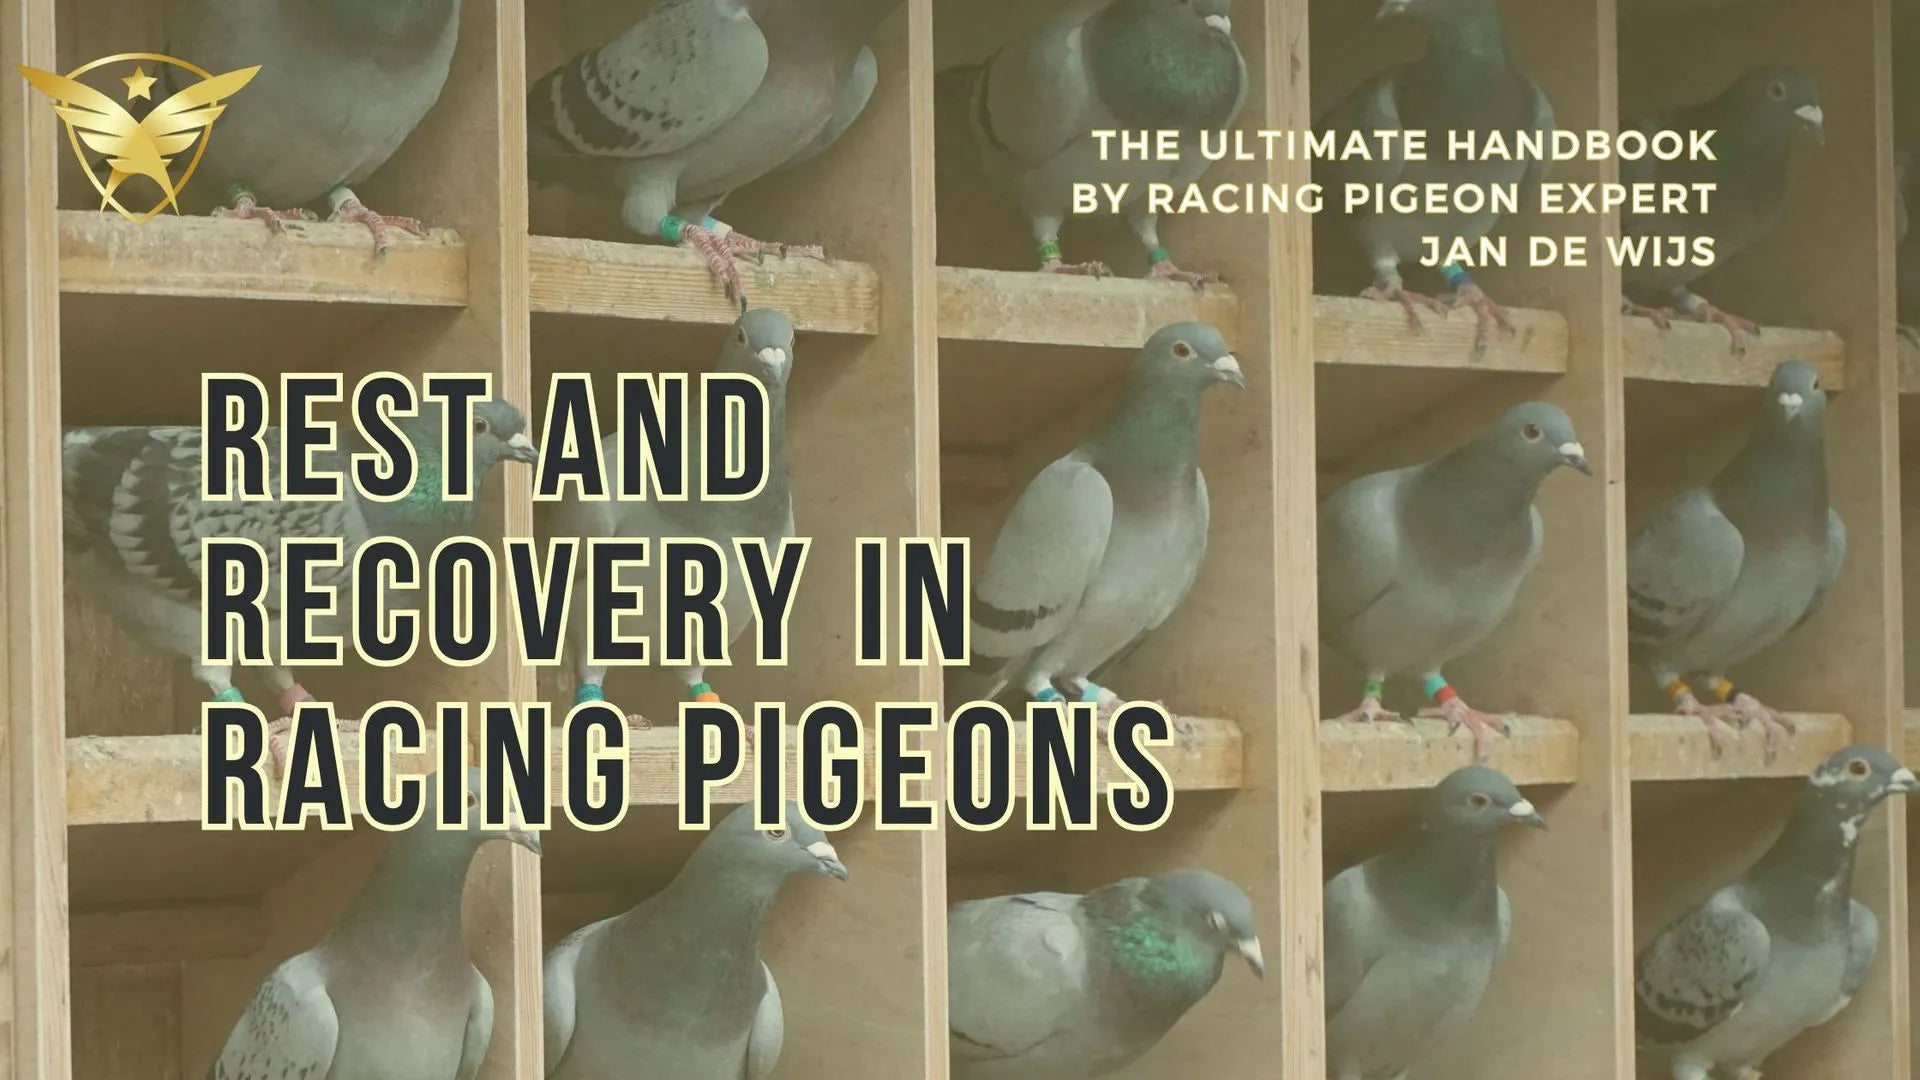 The Ultimate Handbook for Rest and Recovery in Racing Pigeons